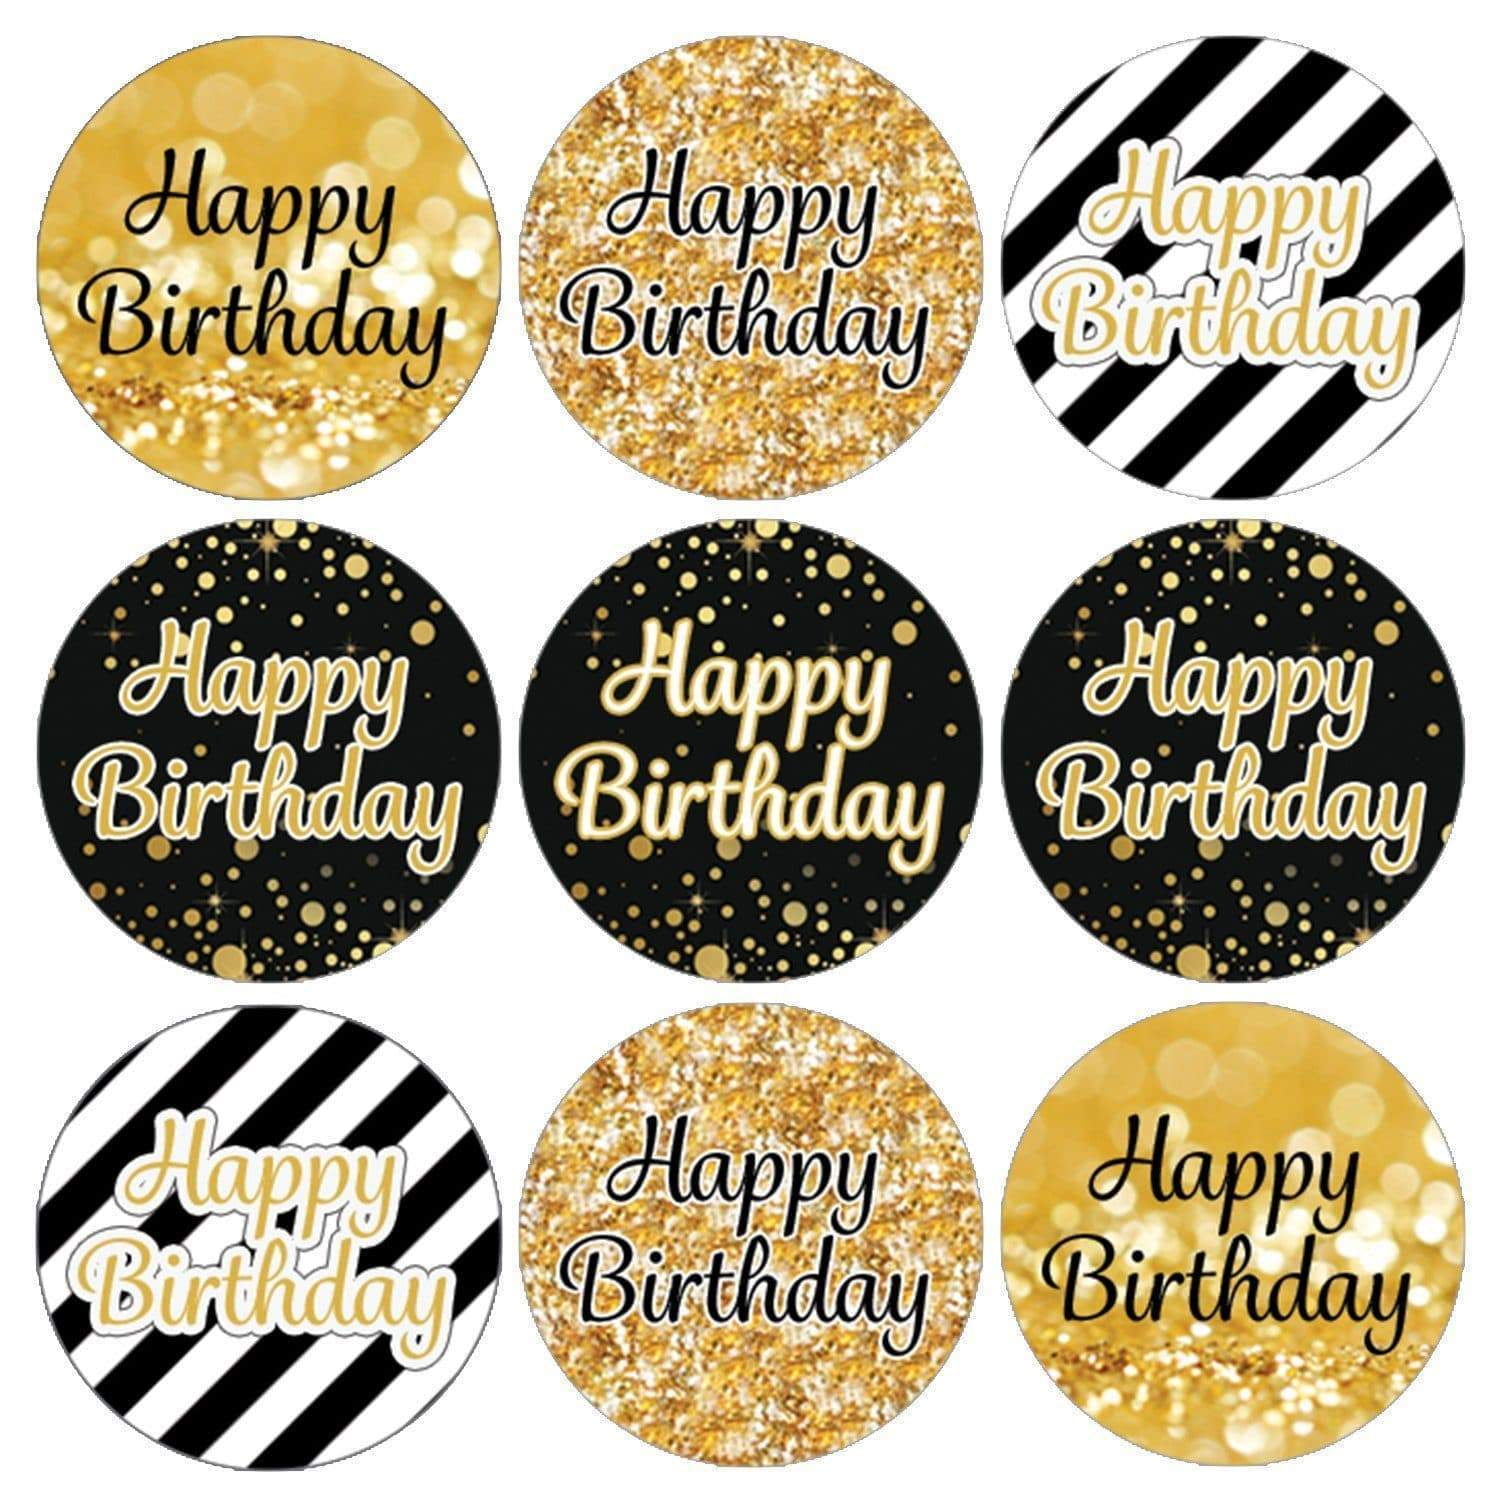 Custom Door Decals Vinyl Stickers Multiple Sizes Happy Age Birthday Dad Holidays and Occasions Happy Birthday Outdoor Luggage & Bumper Stickers for Cars Blue 14X10Inches Set of 10